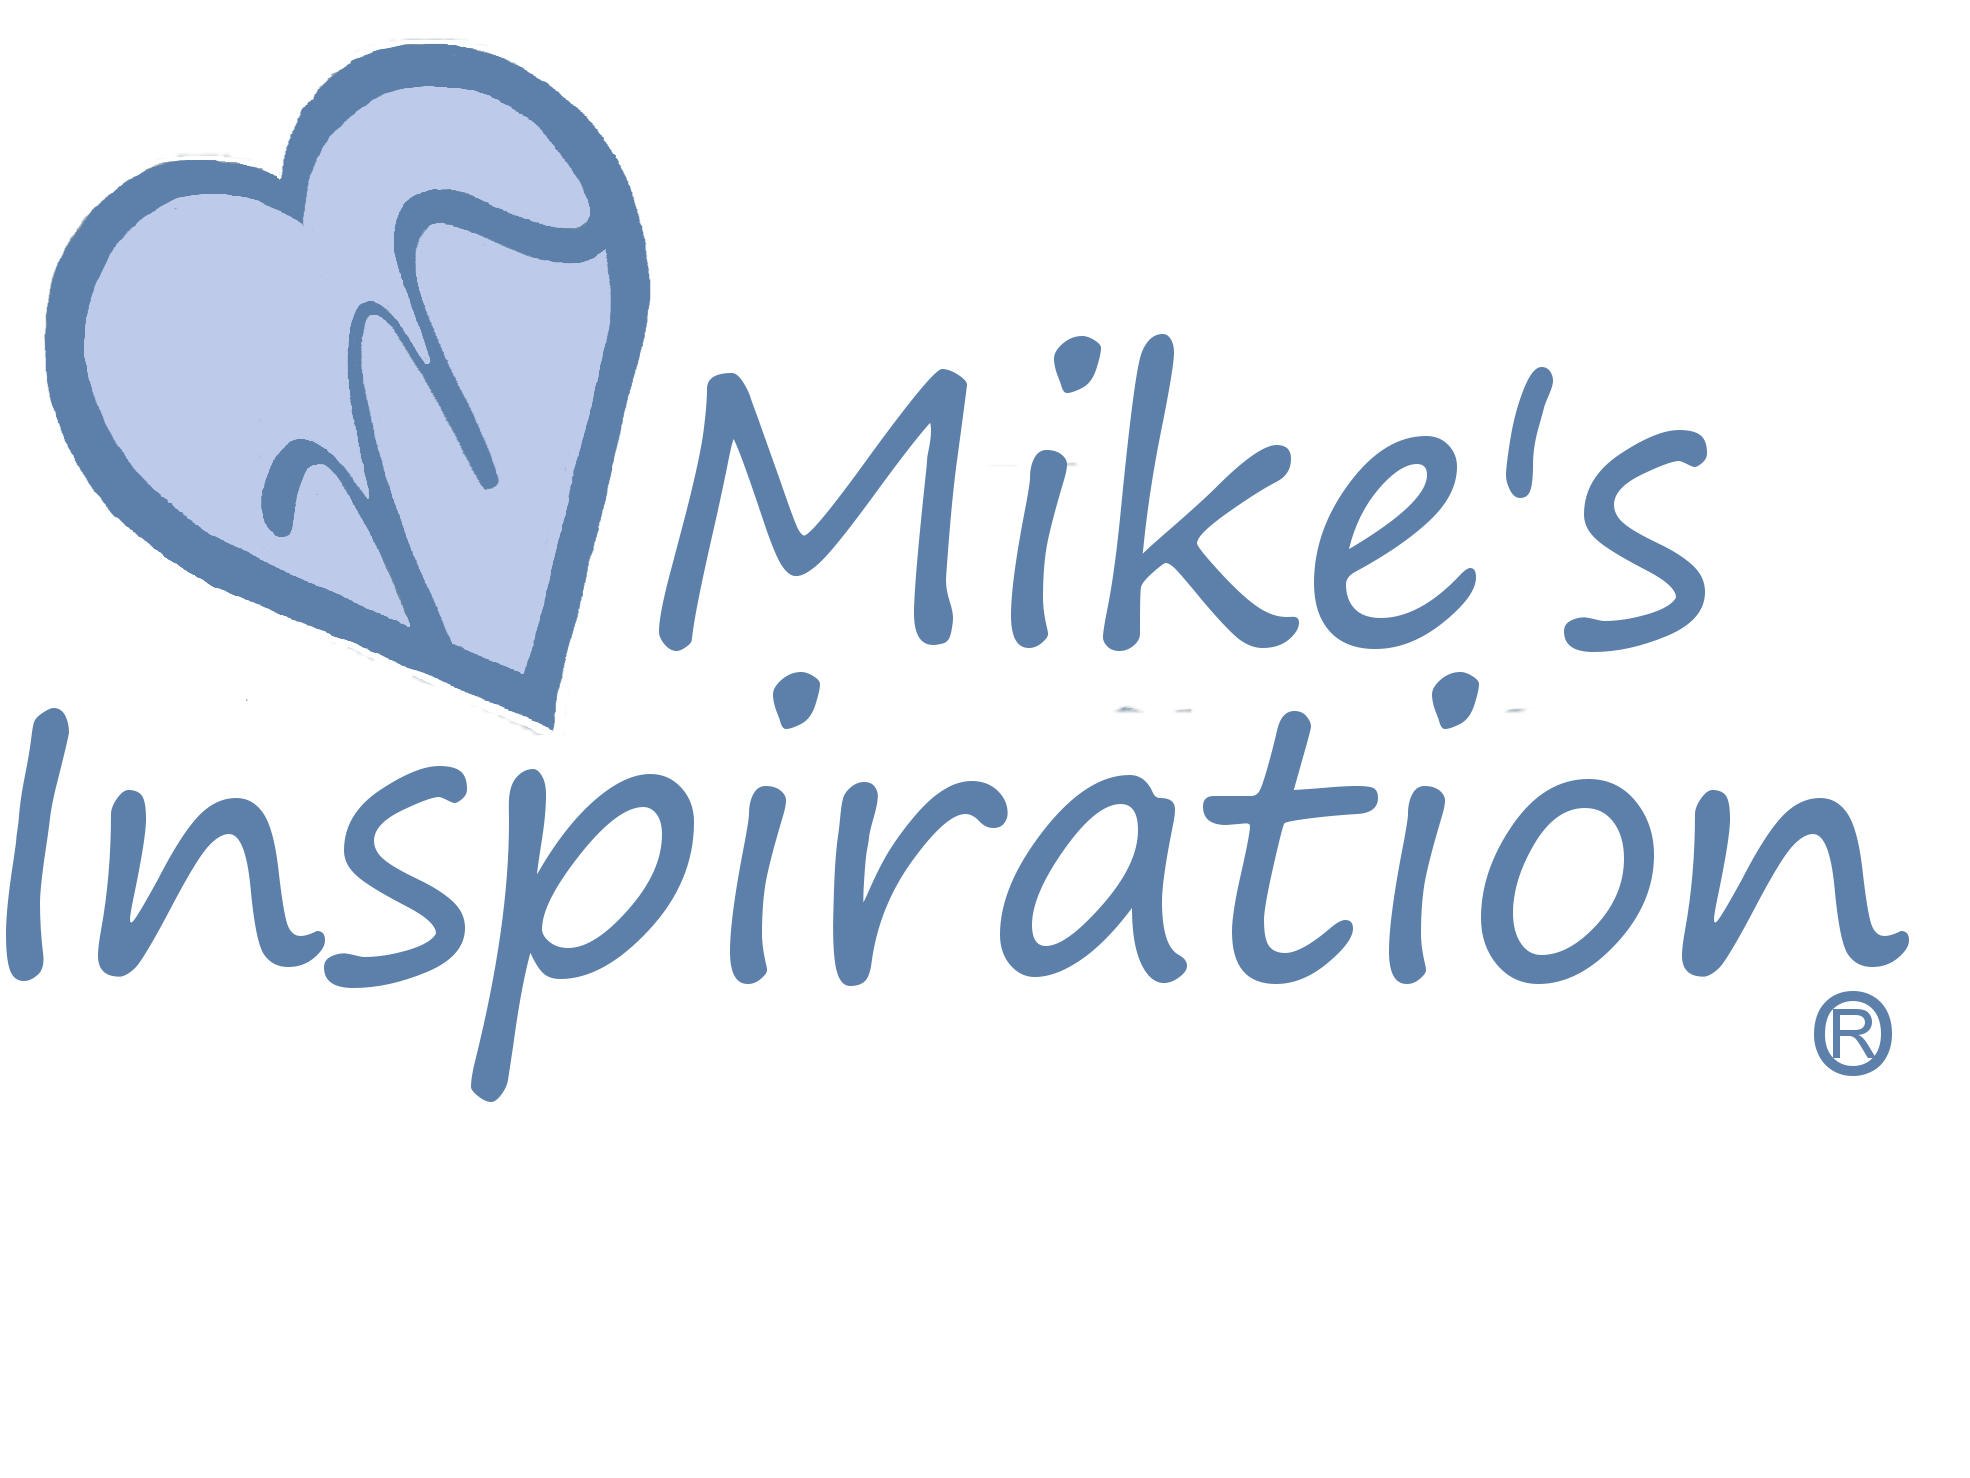 Mike's Inspiration